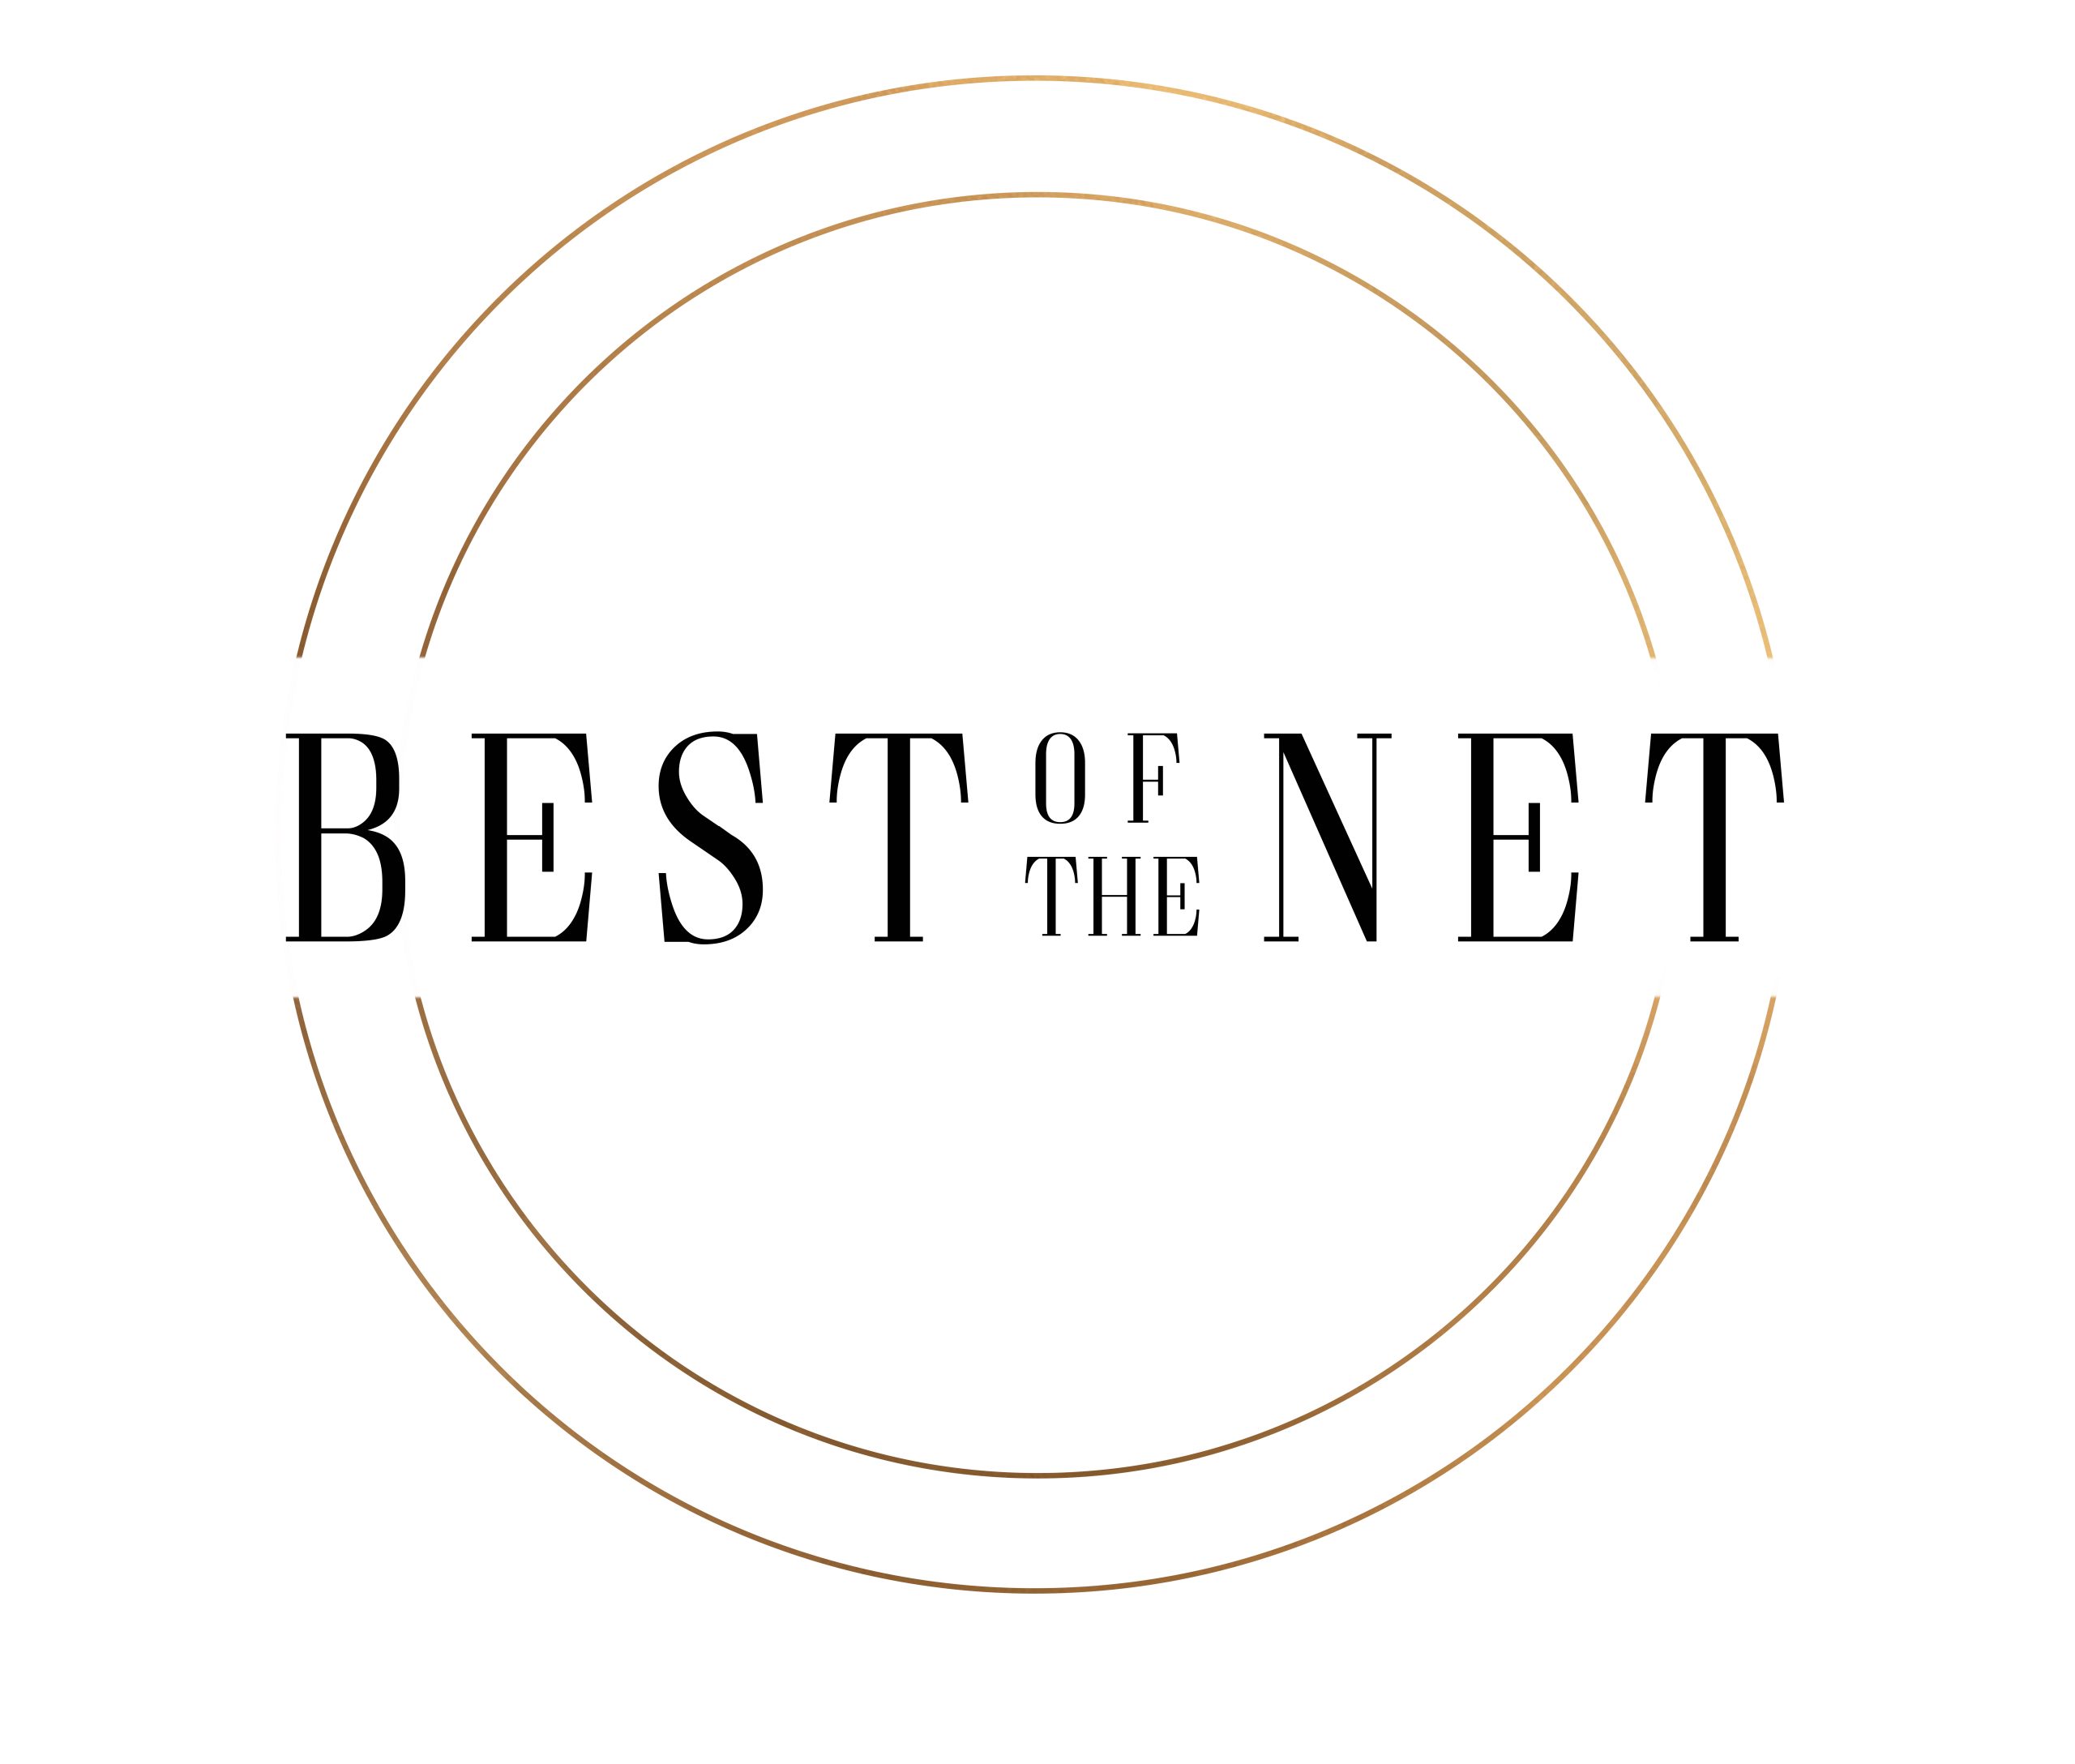  Legacy Russell and Claire Luchette selected for 2022 Best of the Net Anthology